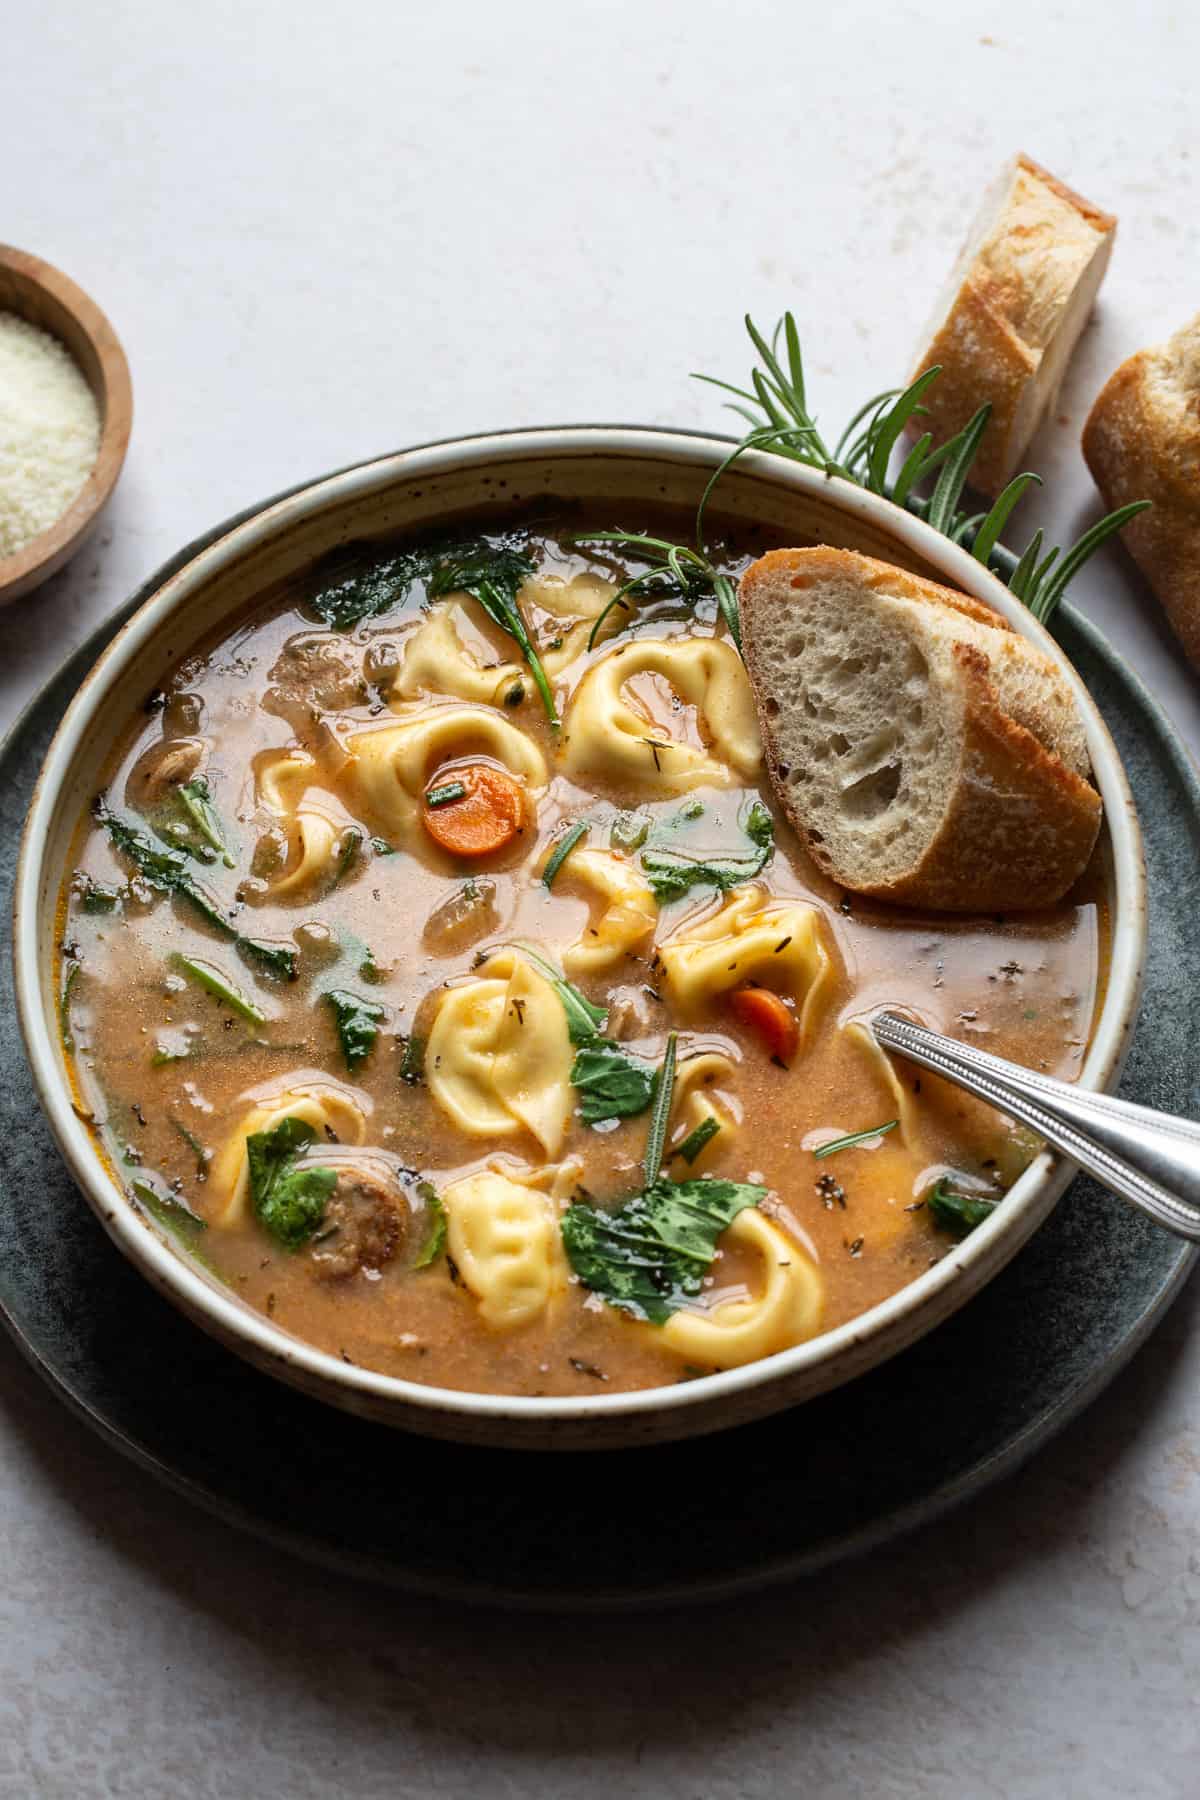 Tortellini Soup with Sausage served in a bowl with bread.